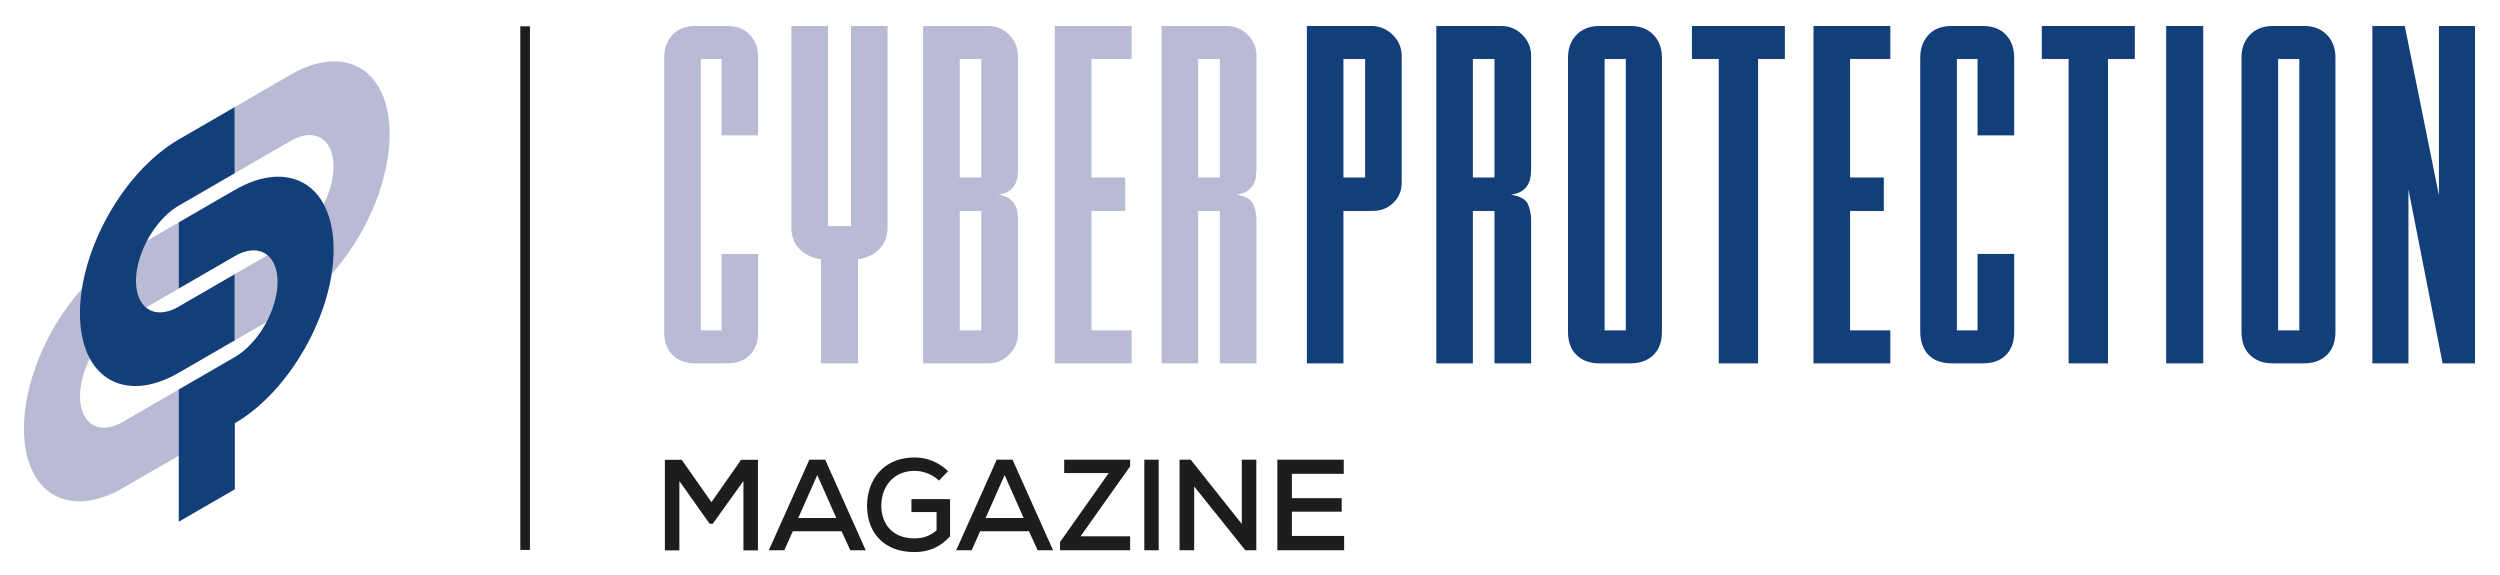 Cyber Protection Magazine